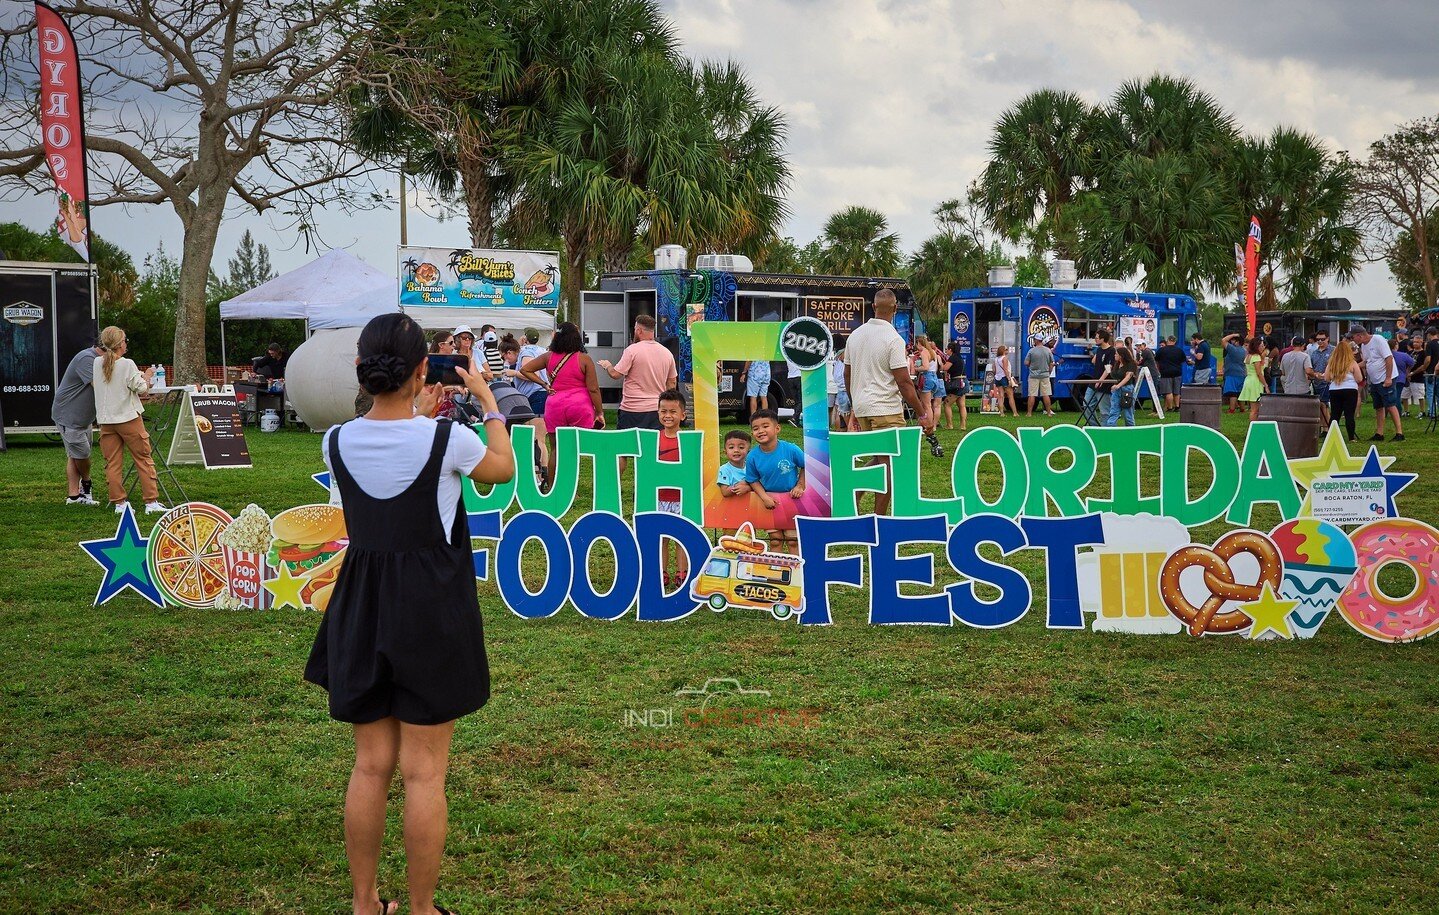 Were you seen at the inaugural SoFlo Food Fest &amp; Craft Fair? 
.
.
.
📸 @battlebrosevents_soflo @battlebrosevents
👉 Have Event or Branding/Commercial photography needs? Let's connect and see how I can help! 
✉️ john@indi-creative.net / 📲 text 56